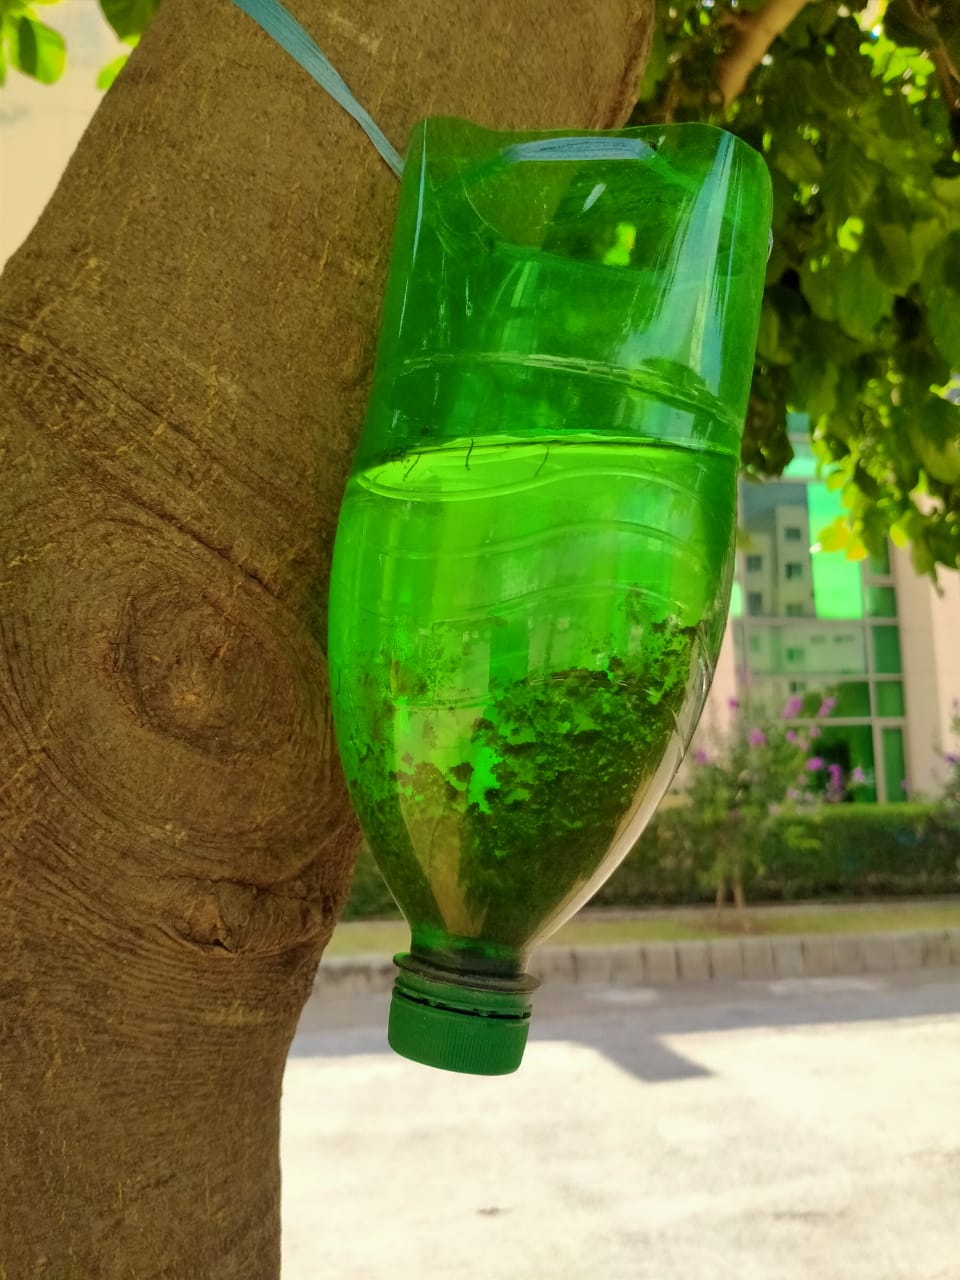 Mosquito larvae in a water-filled bottle in a tree